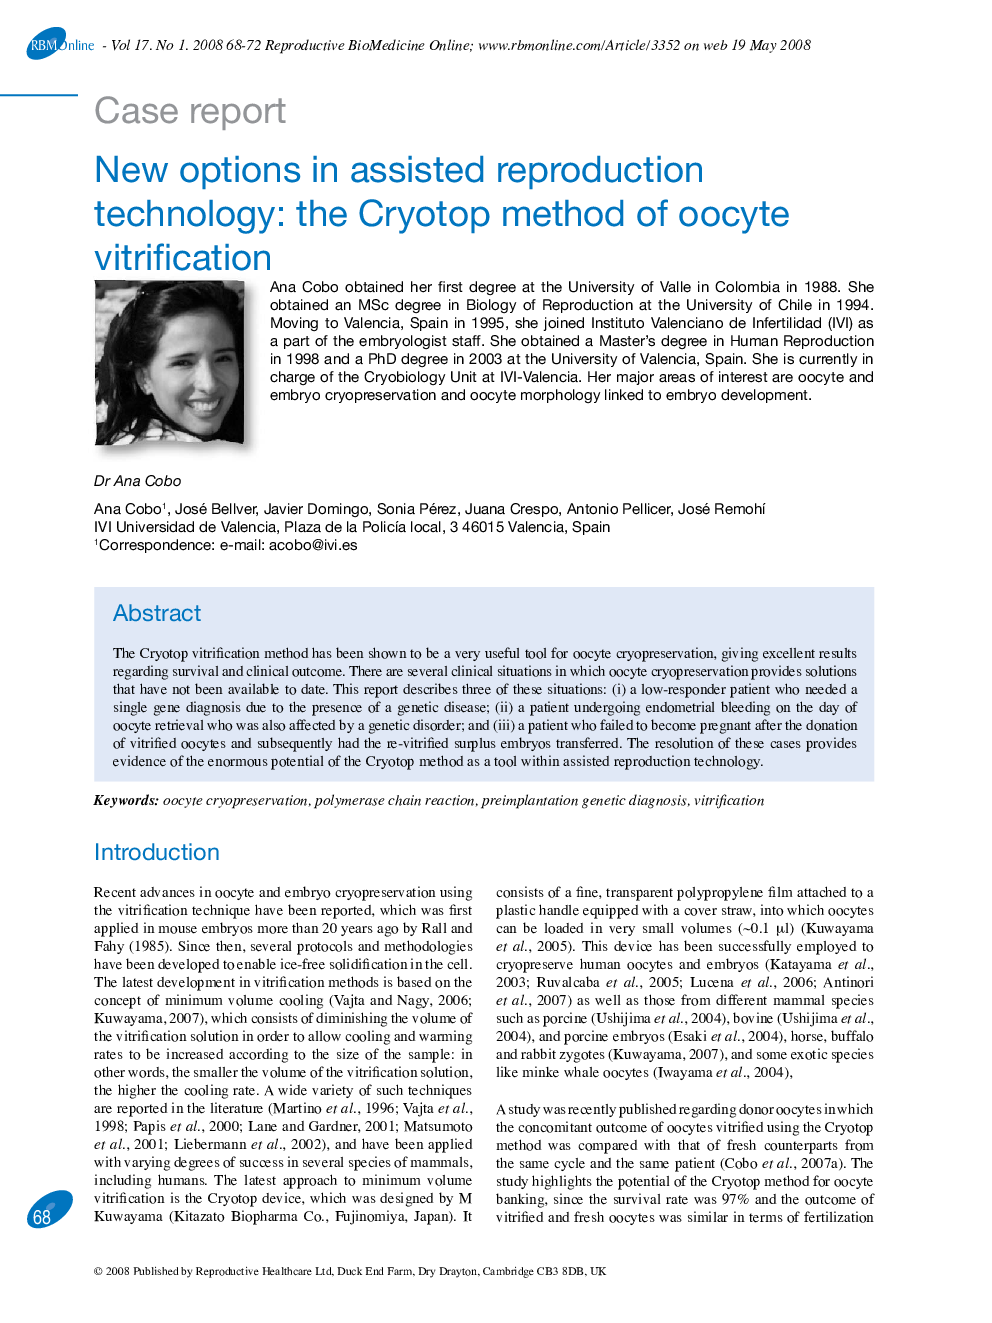 New options in assisted reproduction technology: the Cryotop method of oocyte vitrification 